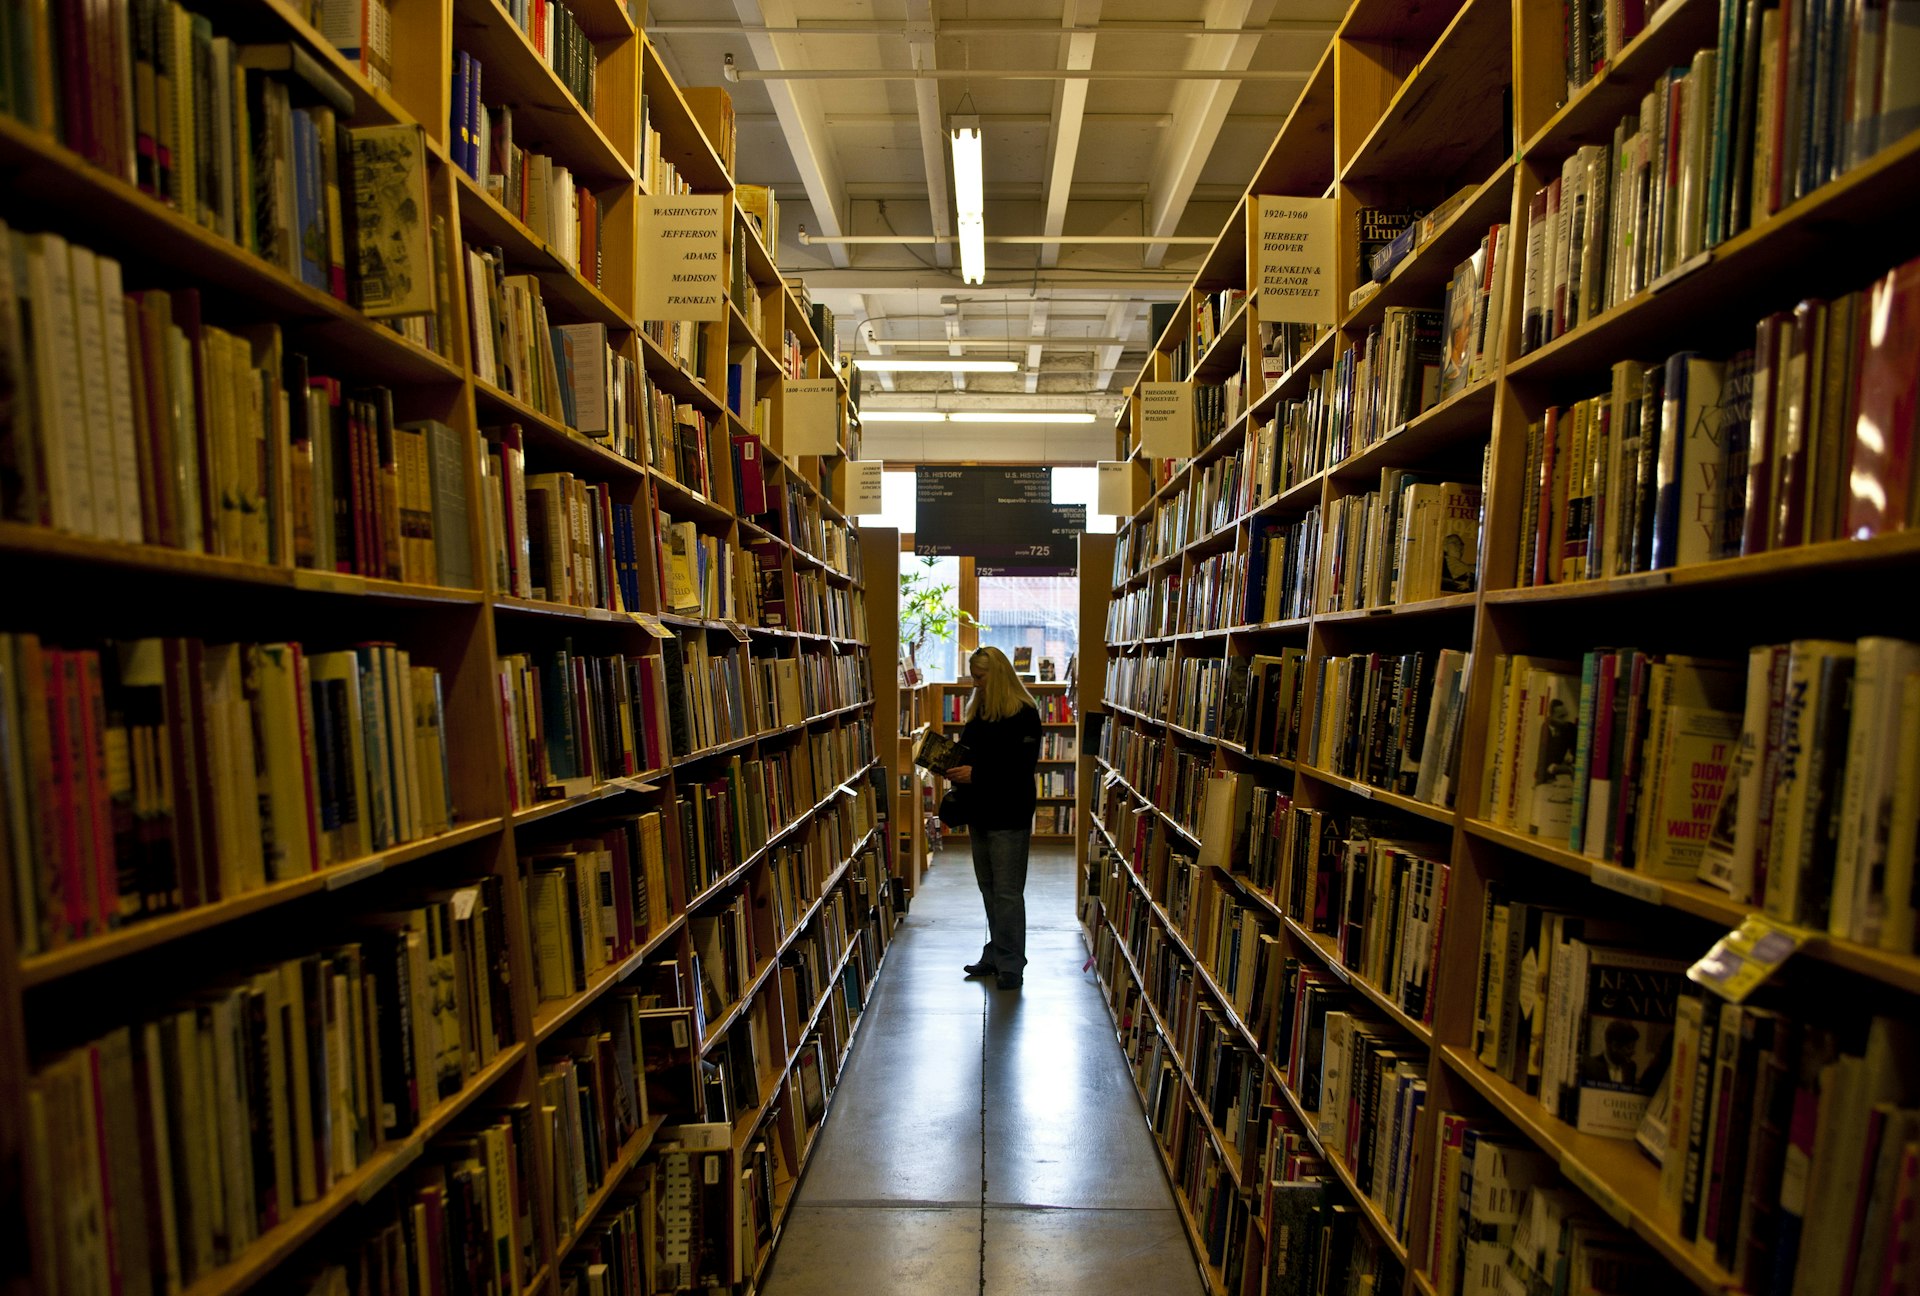 Rows of bookshelves in Powell's bookstore in Portland, Oregon